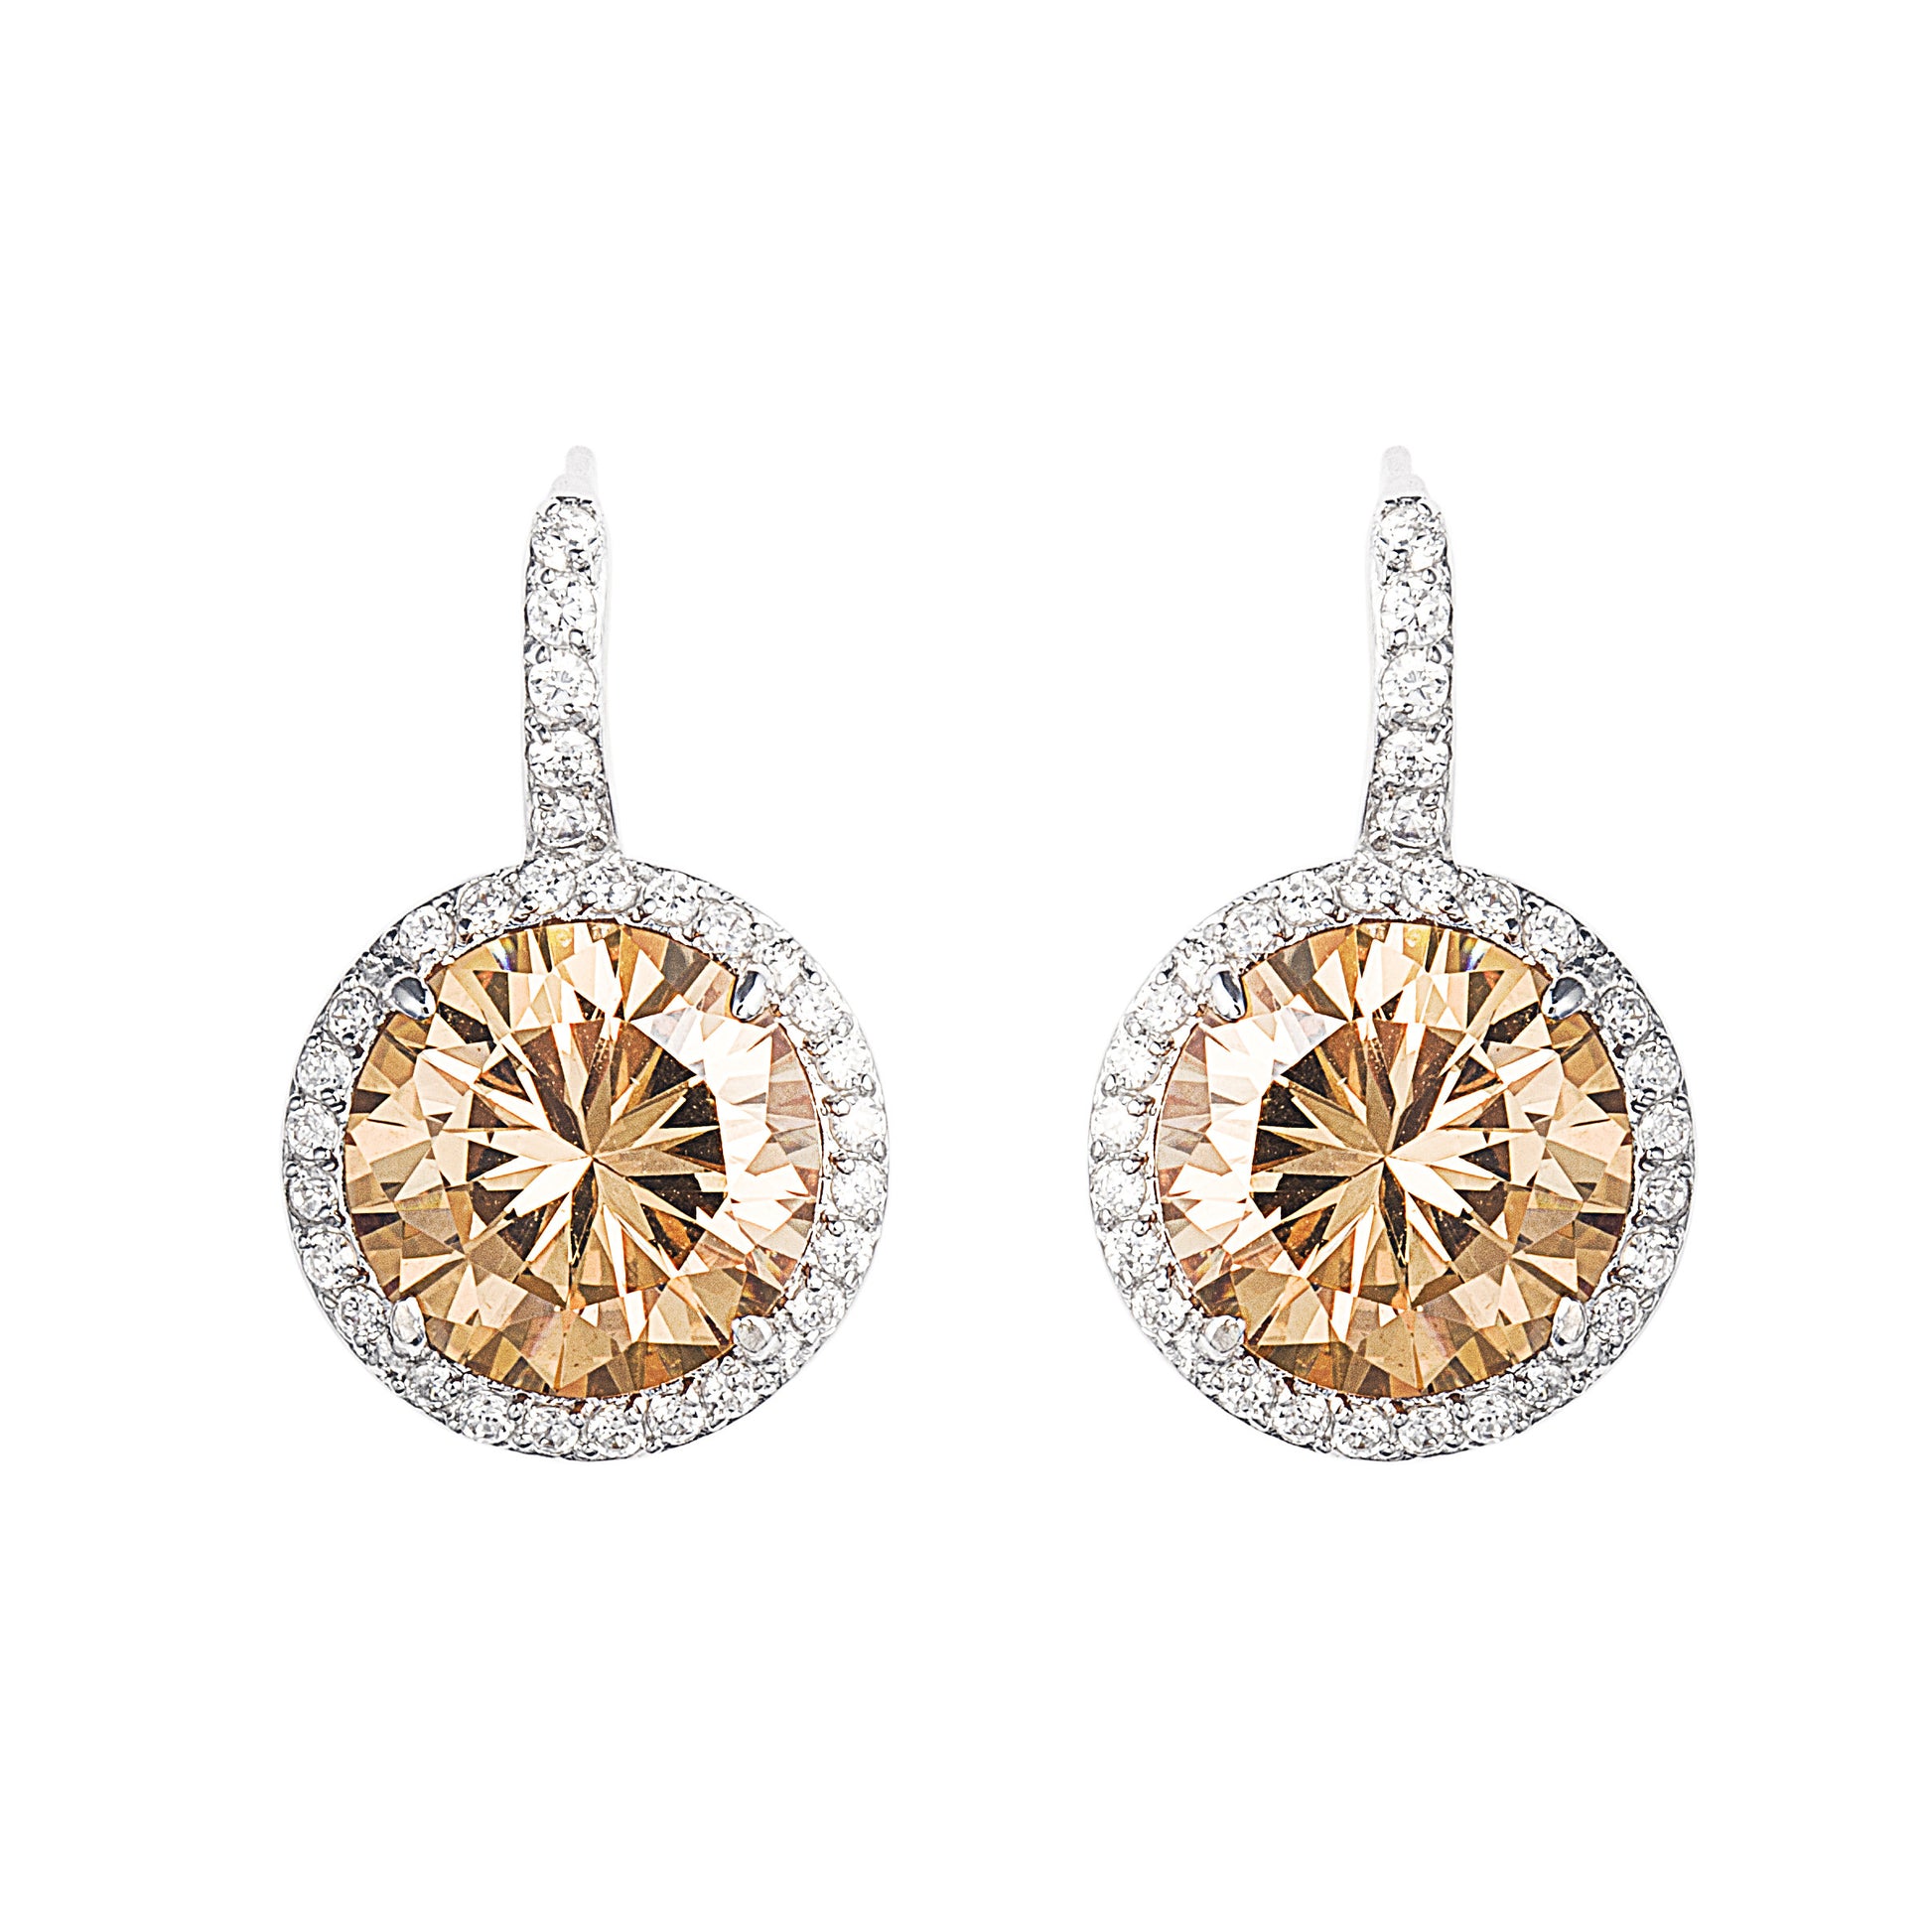 Hanging 925 Sterling Silver earrings featuring a Large Regal Champagne Stone and antique closing mechanism.